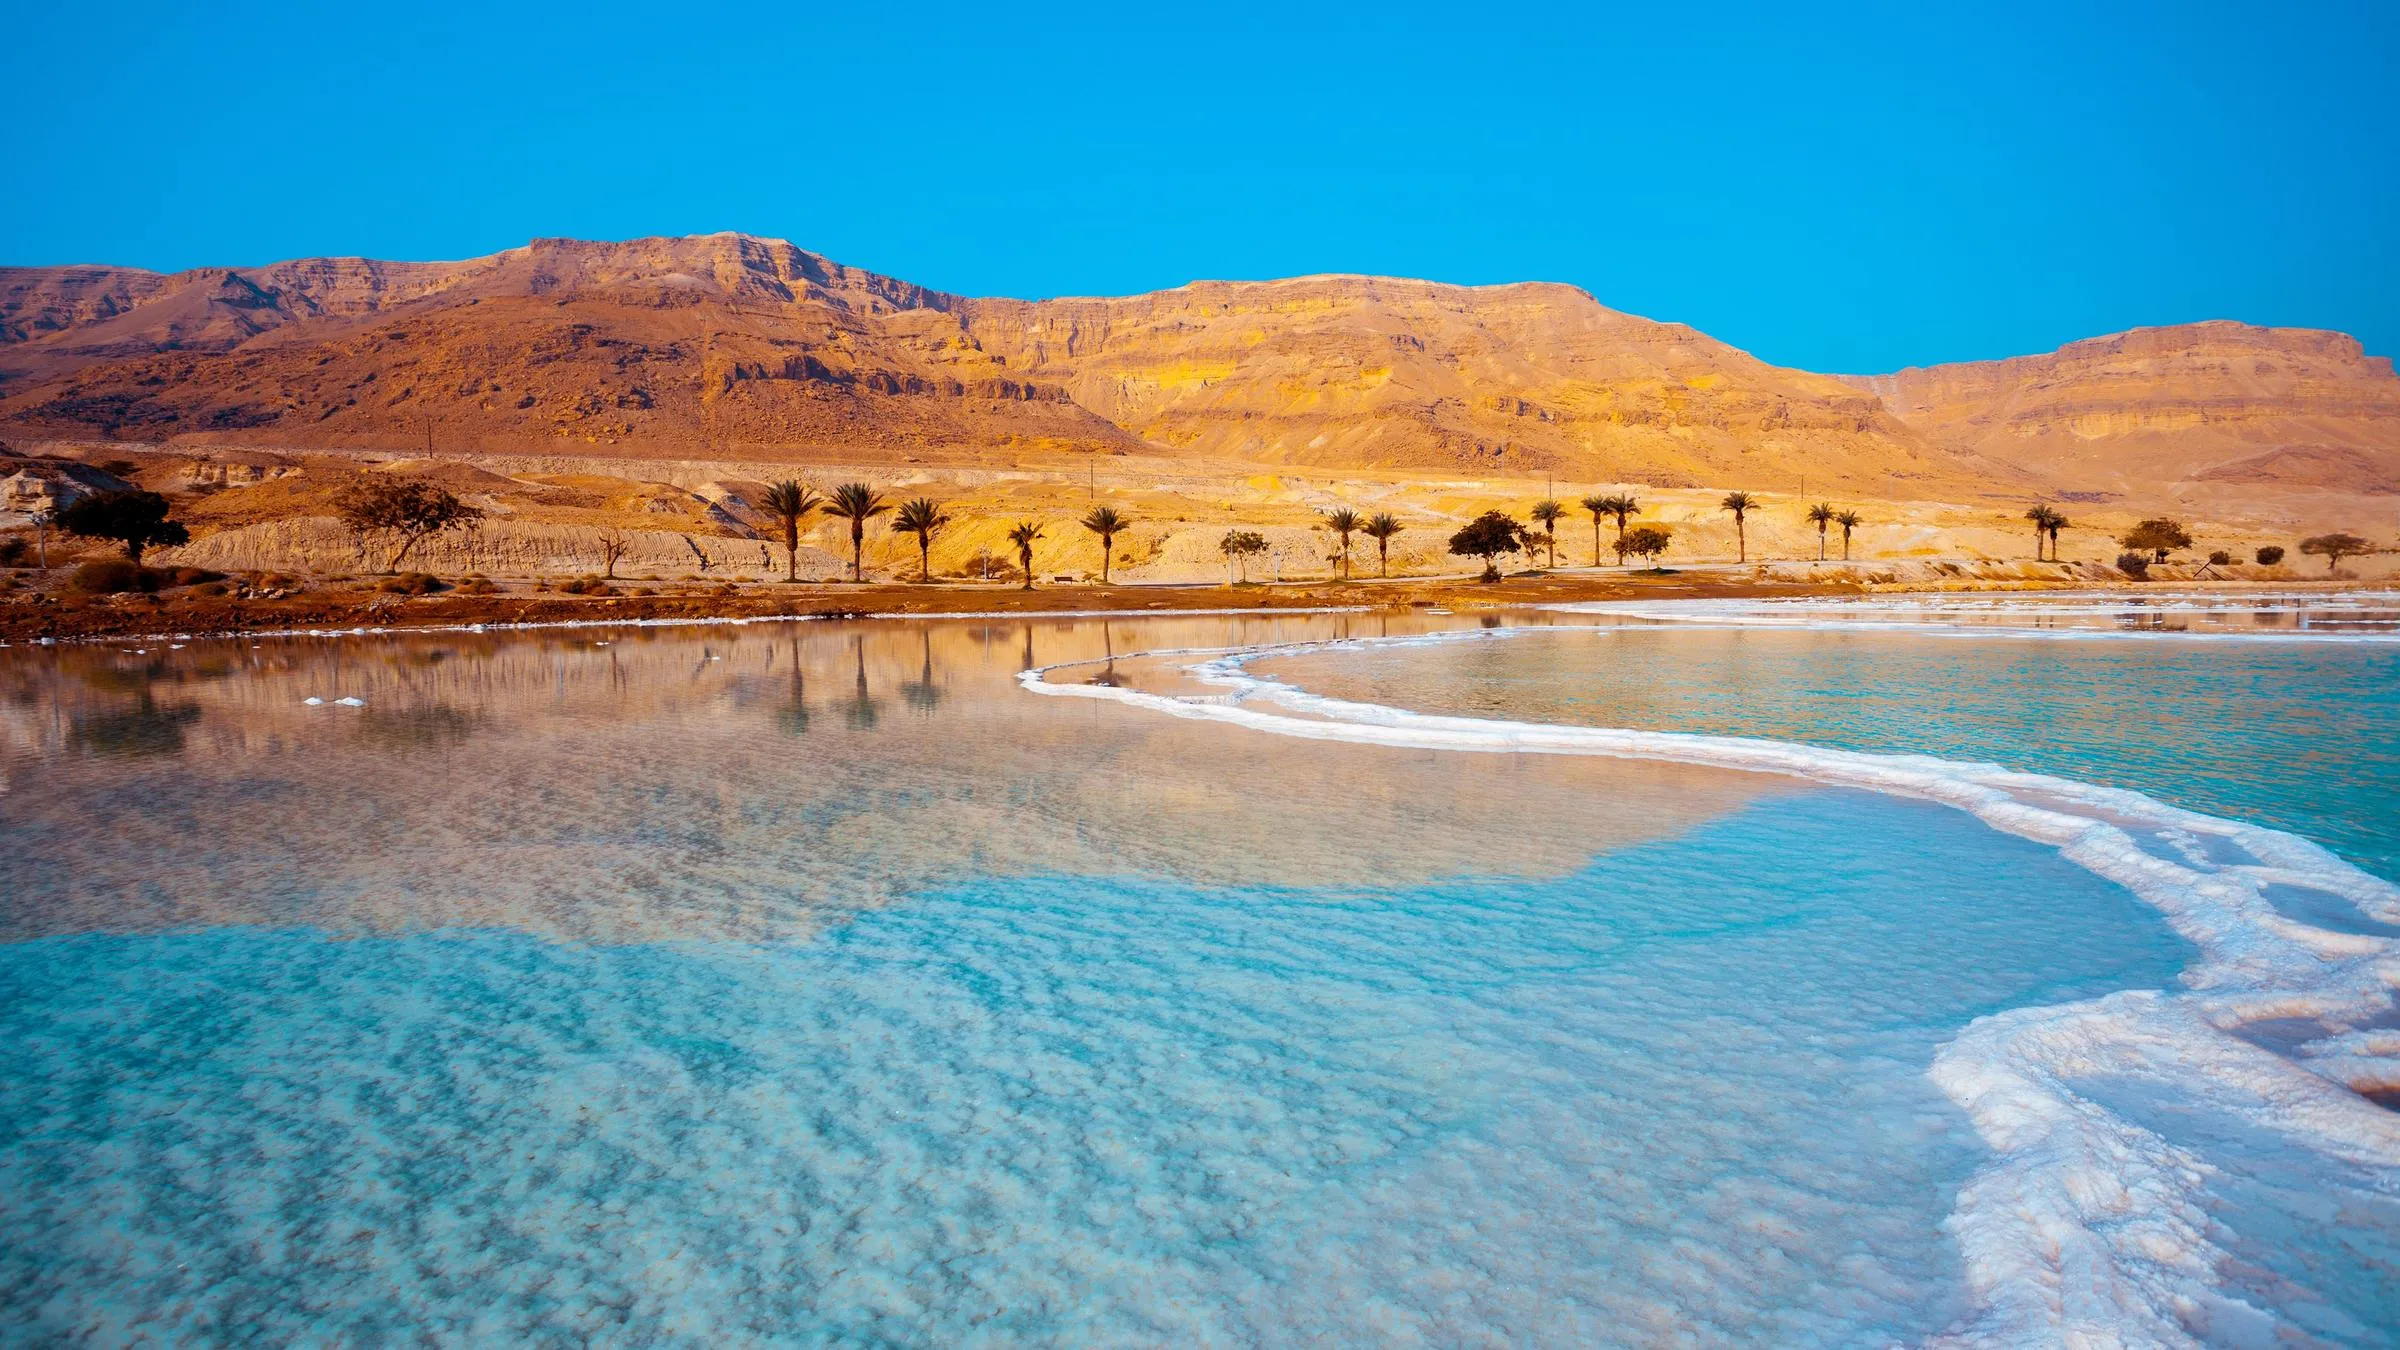 Dead Sea in Israel, Middle East | Nature Reserves,SPAs - Rated 4.3